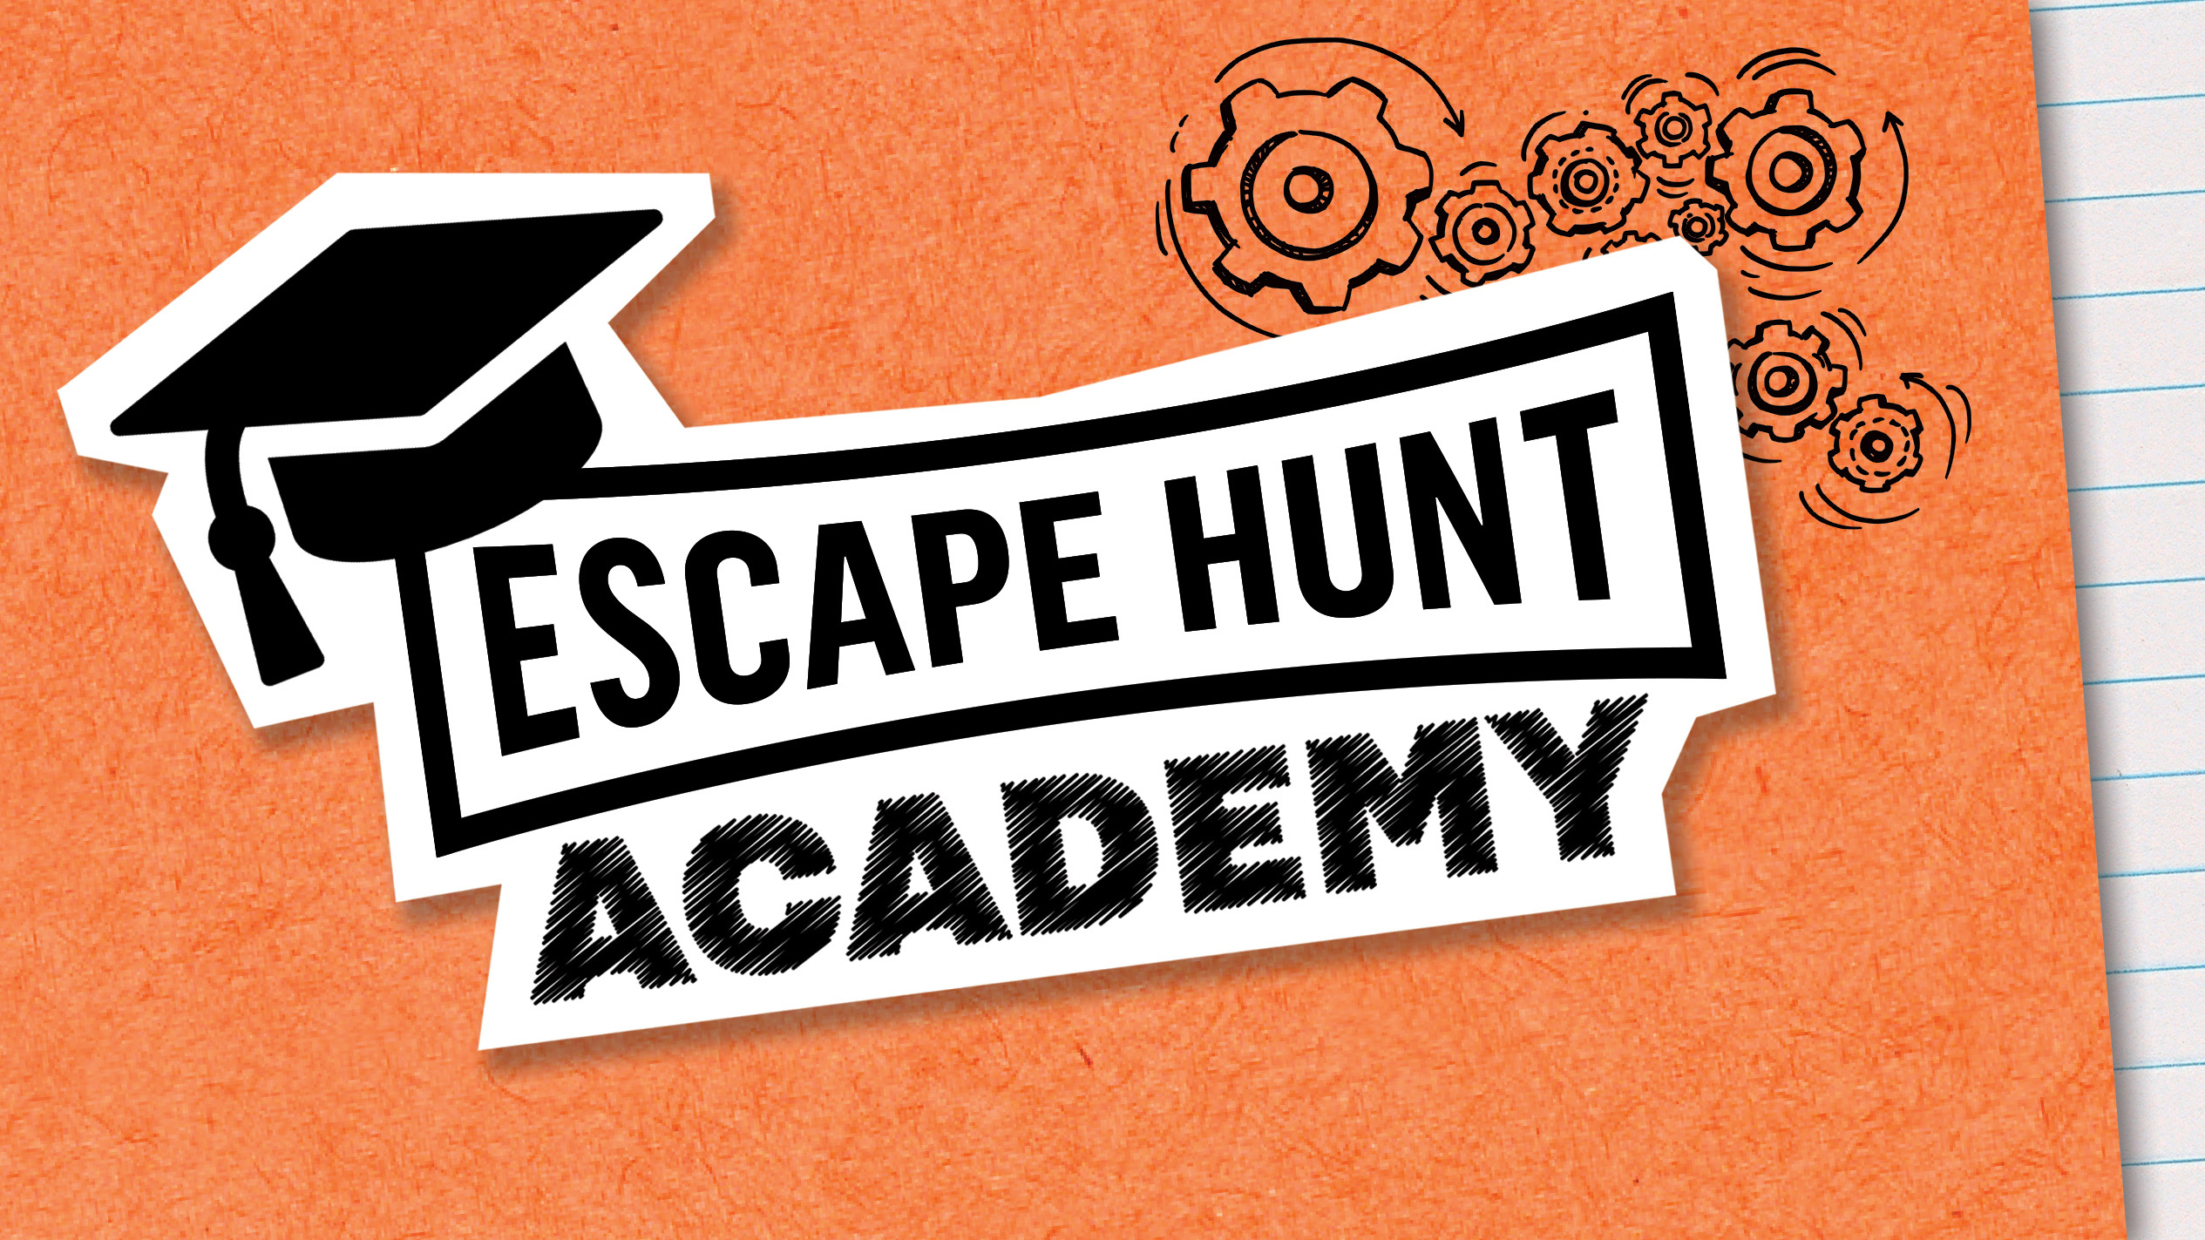 Welcome to the Escape Hunt Academy